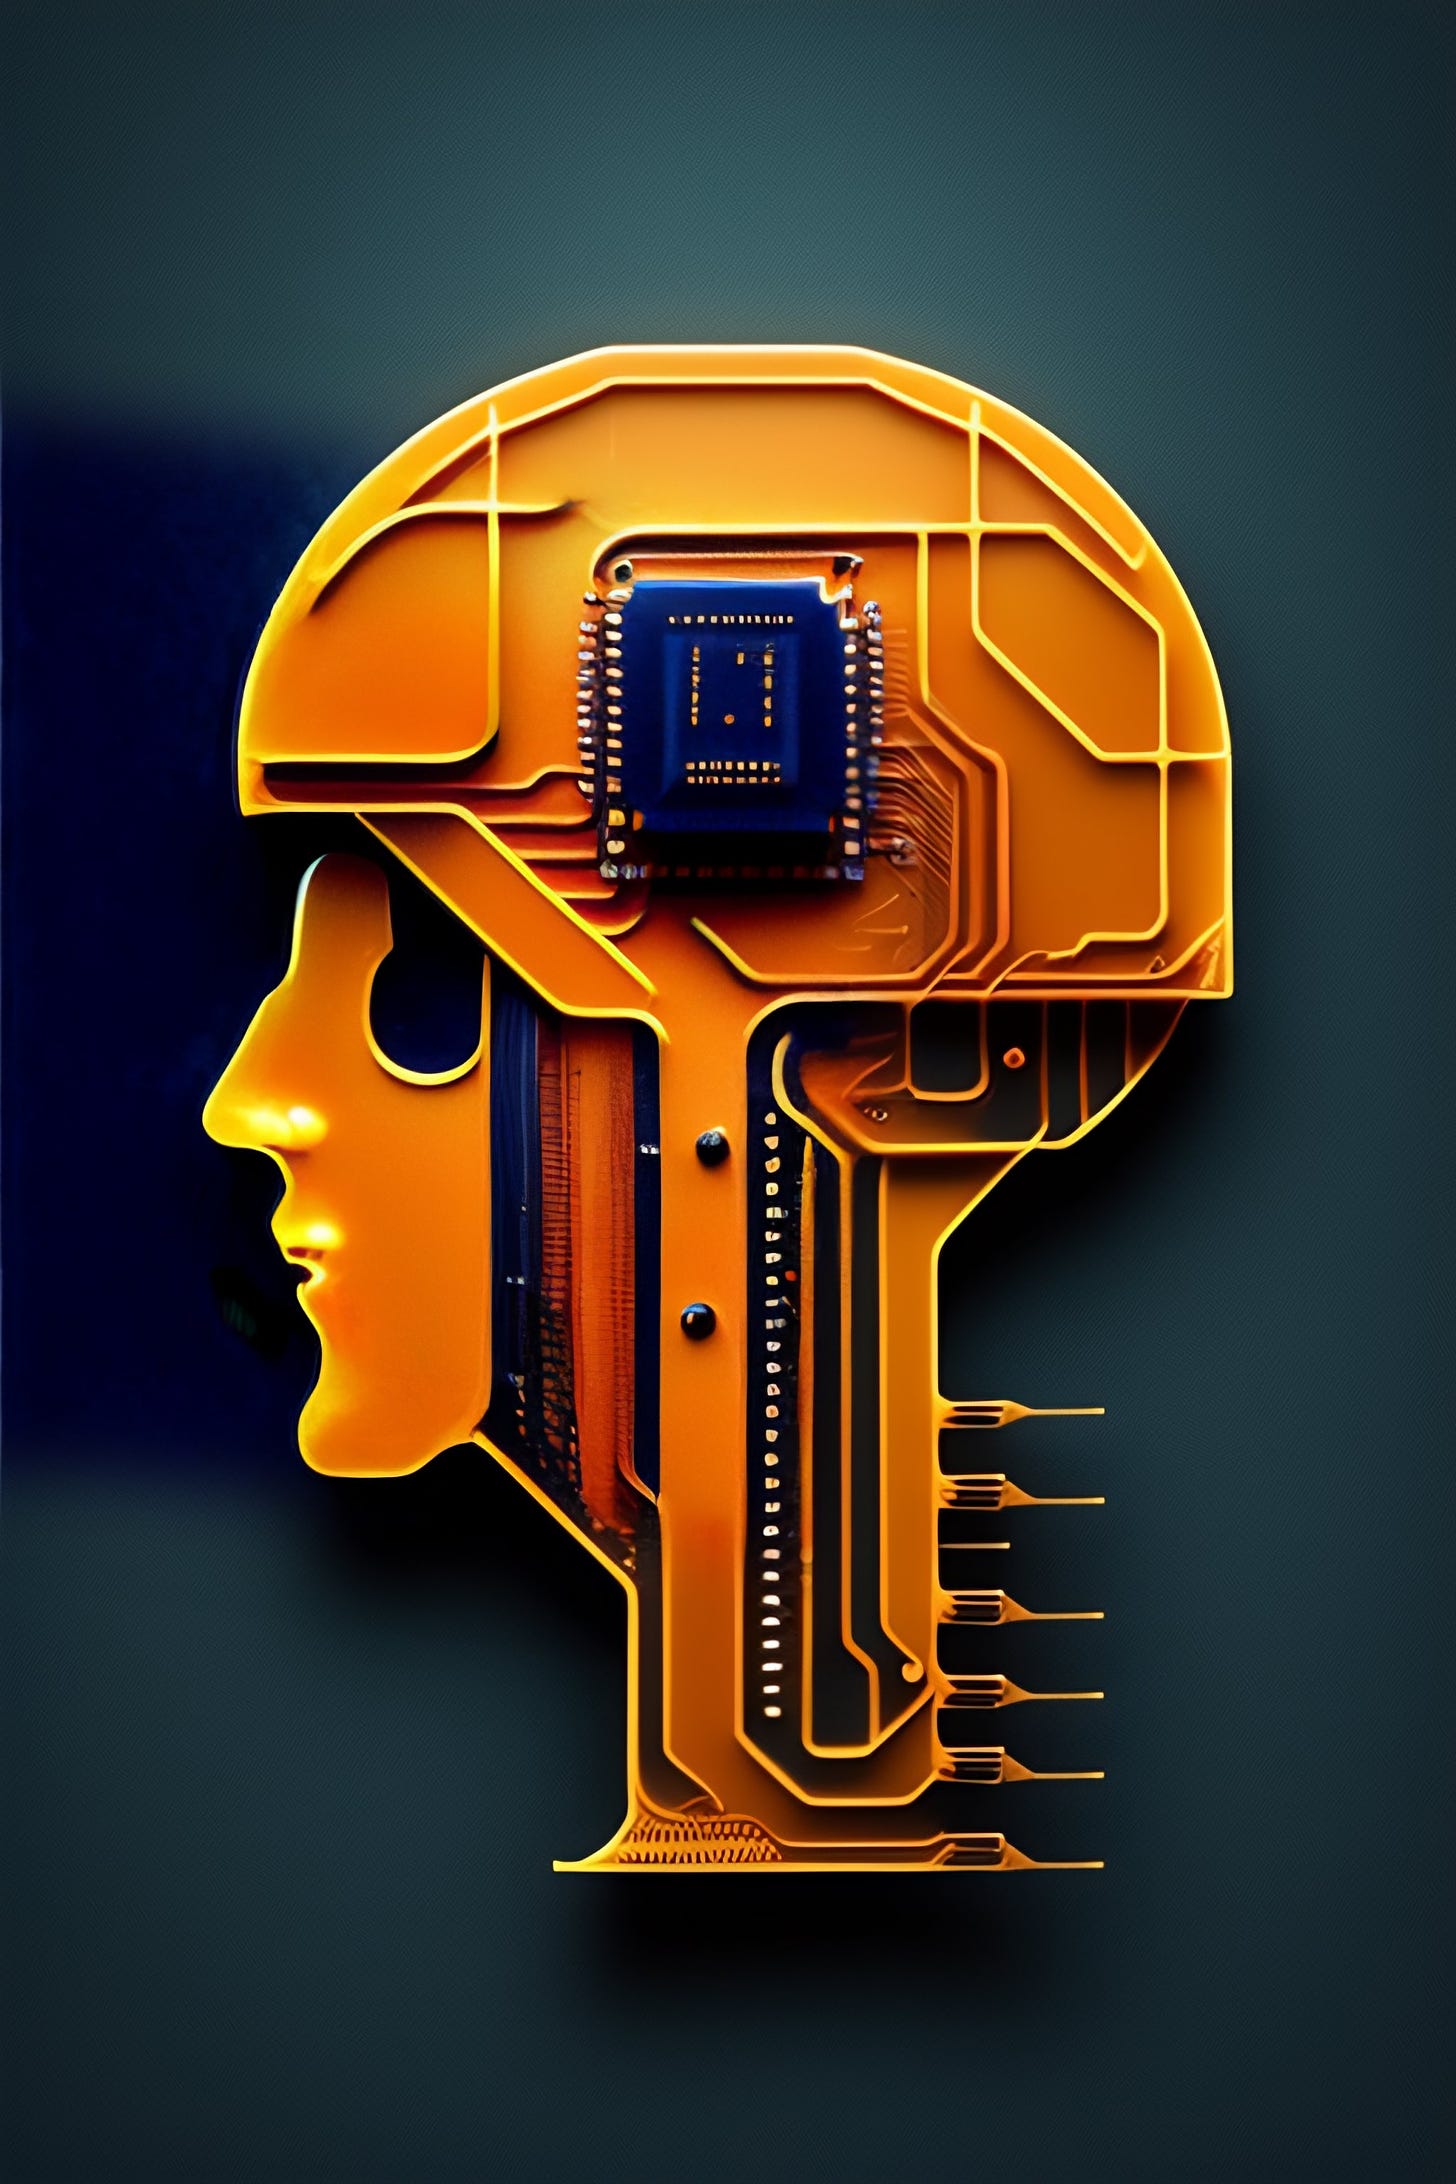 Minimalist logo icon of a robot head made of pcb, brain, chip